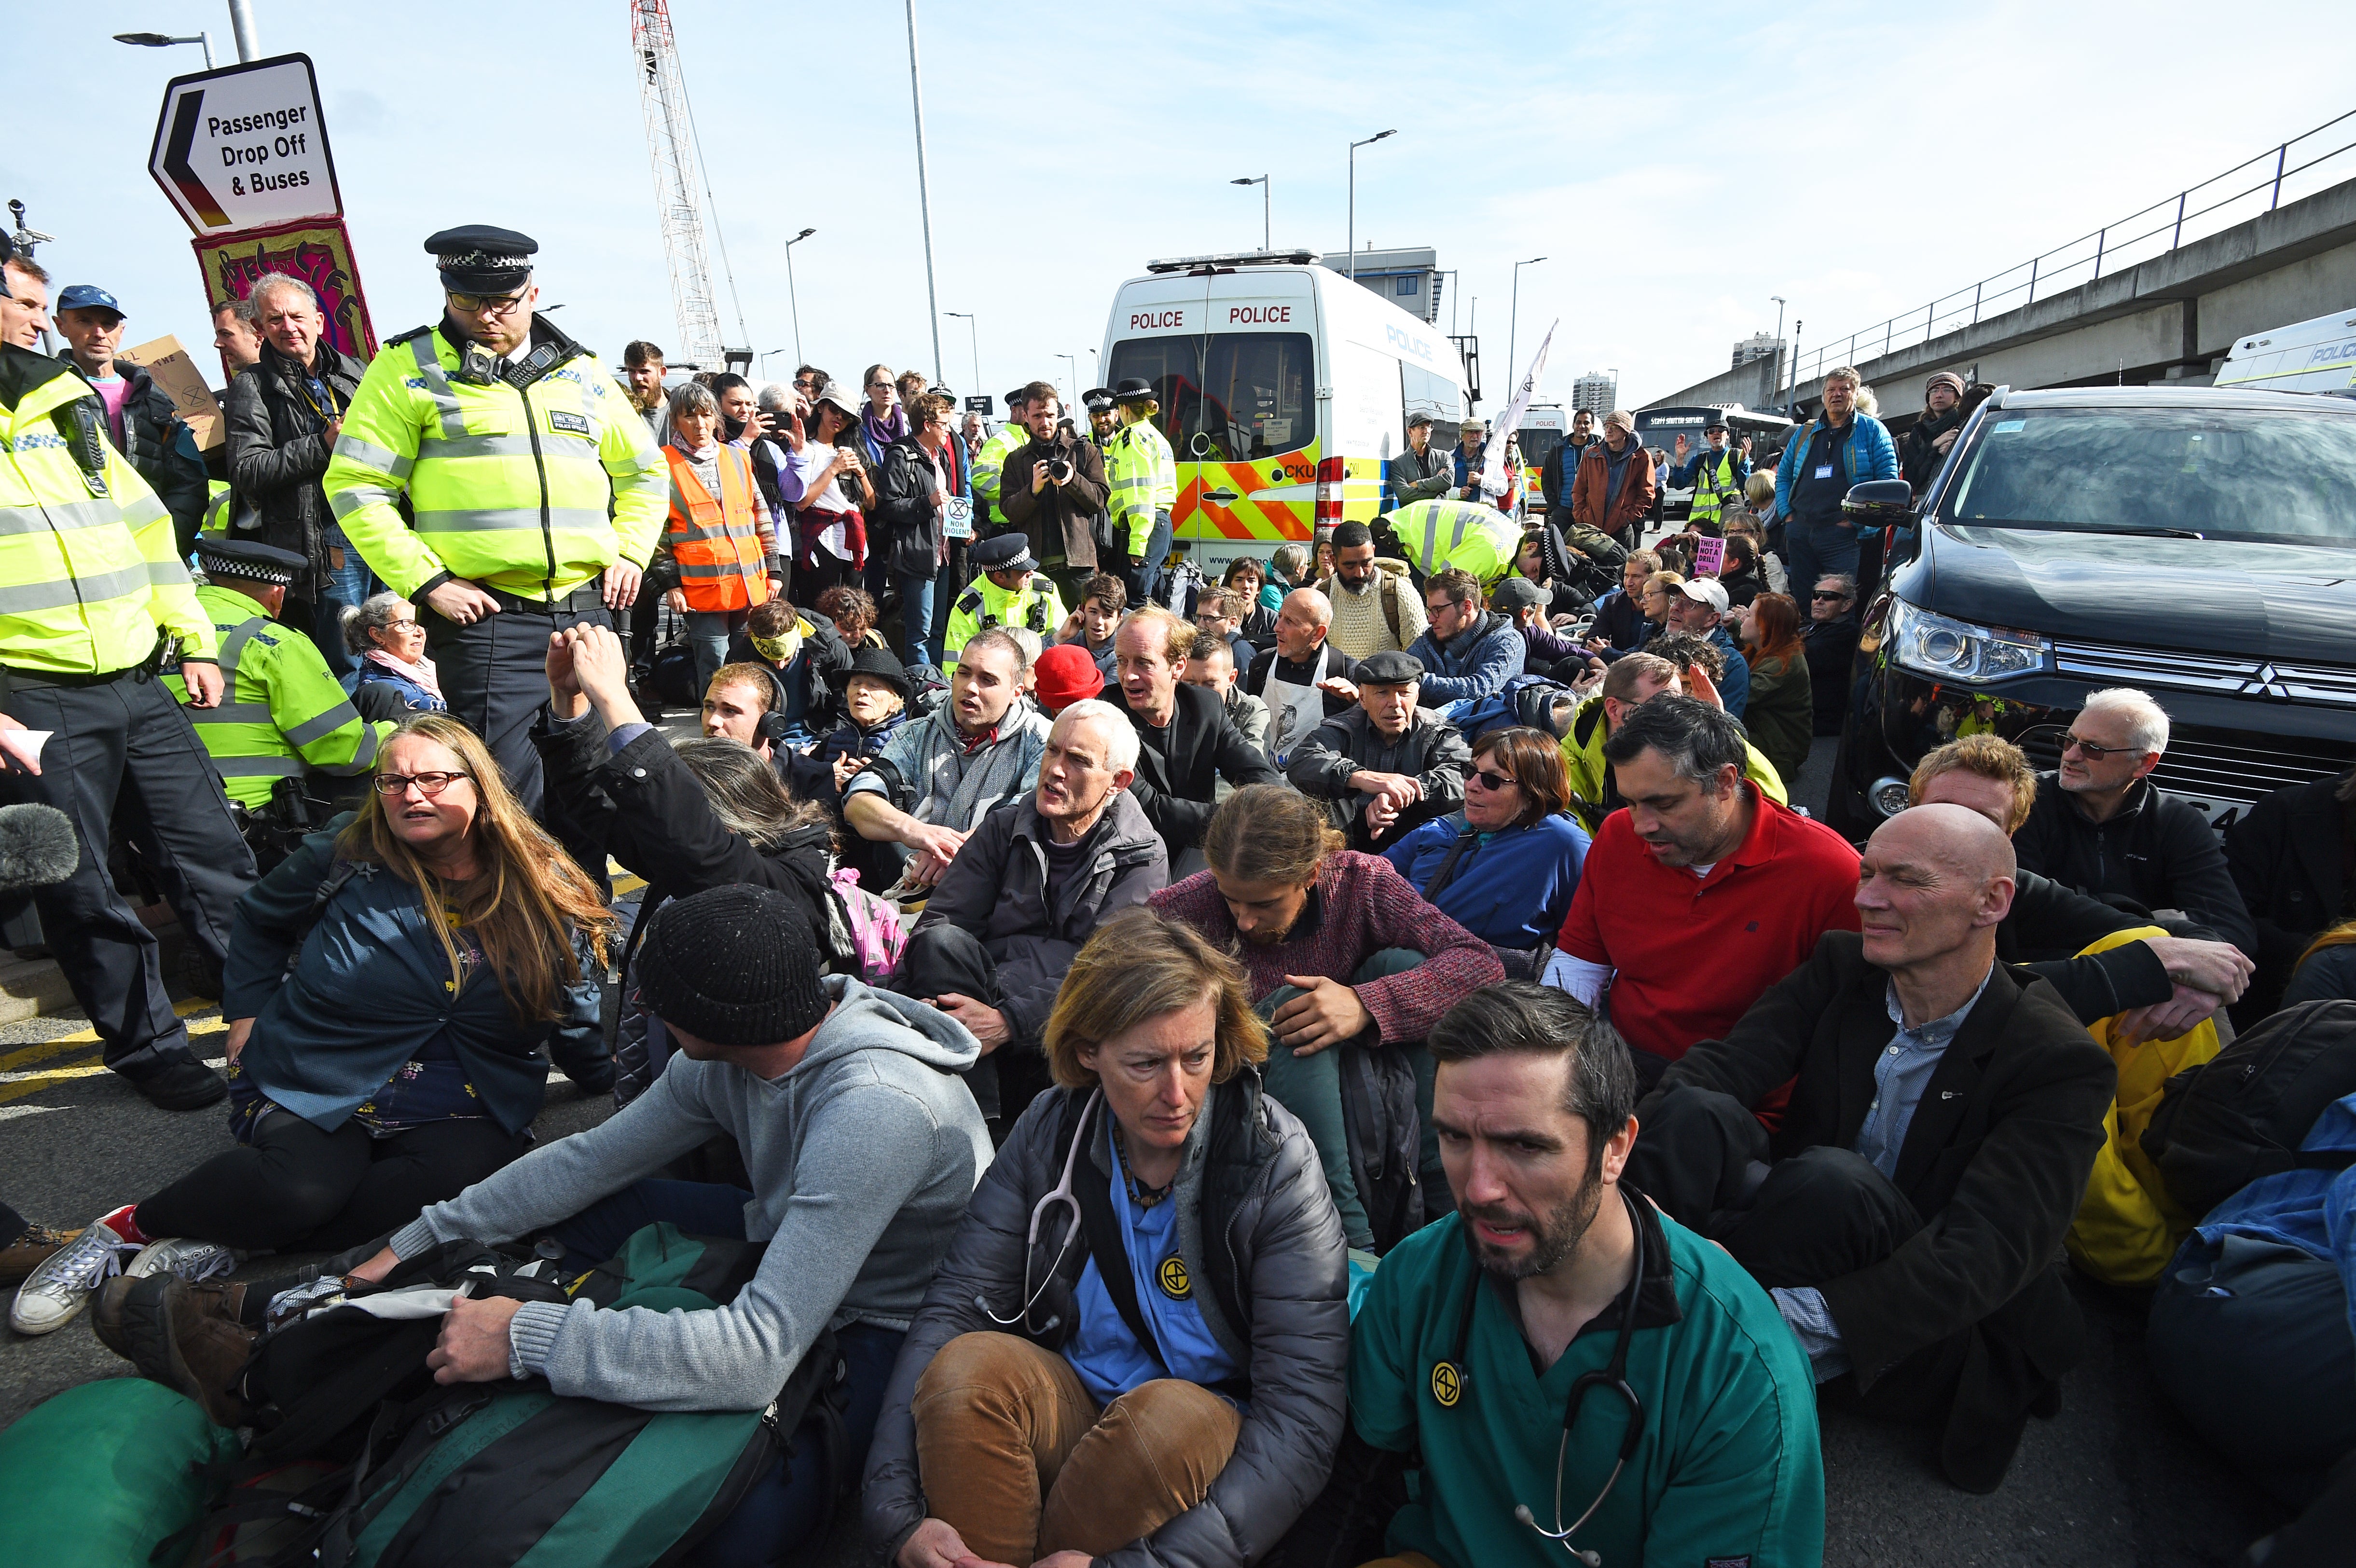 Protesters blocking the road outside City Airport during an Extinction Rebellion climate change protest (Kirsty O’Connor/PA)